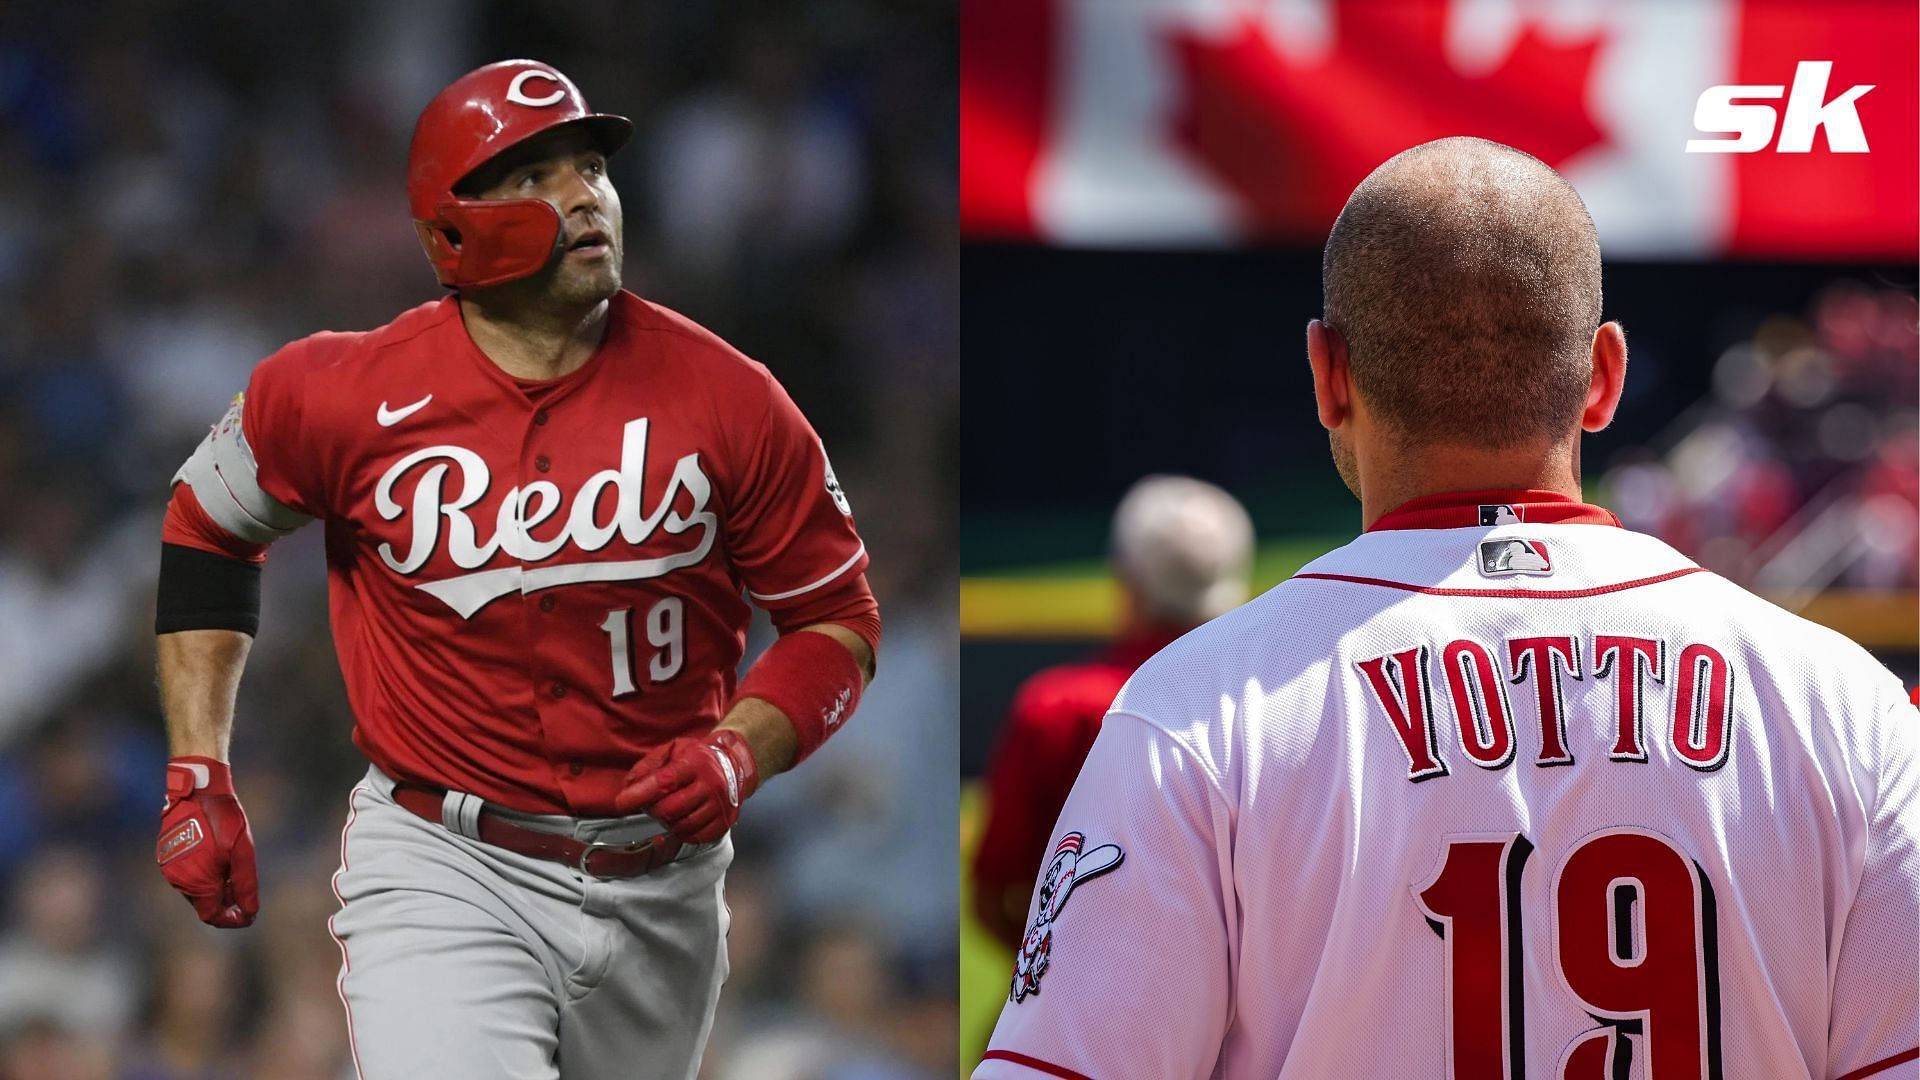 Joey Votto homers in Reds return after 10-month absence